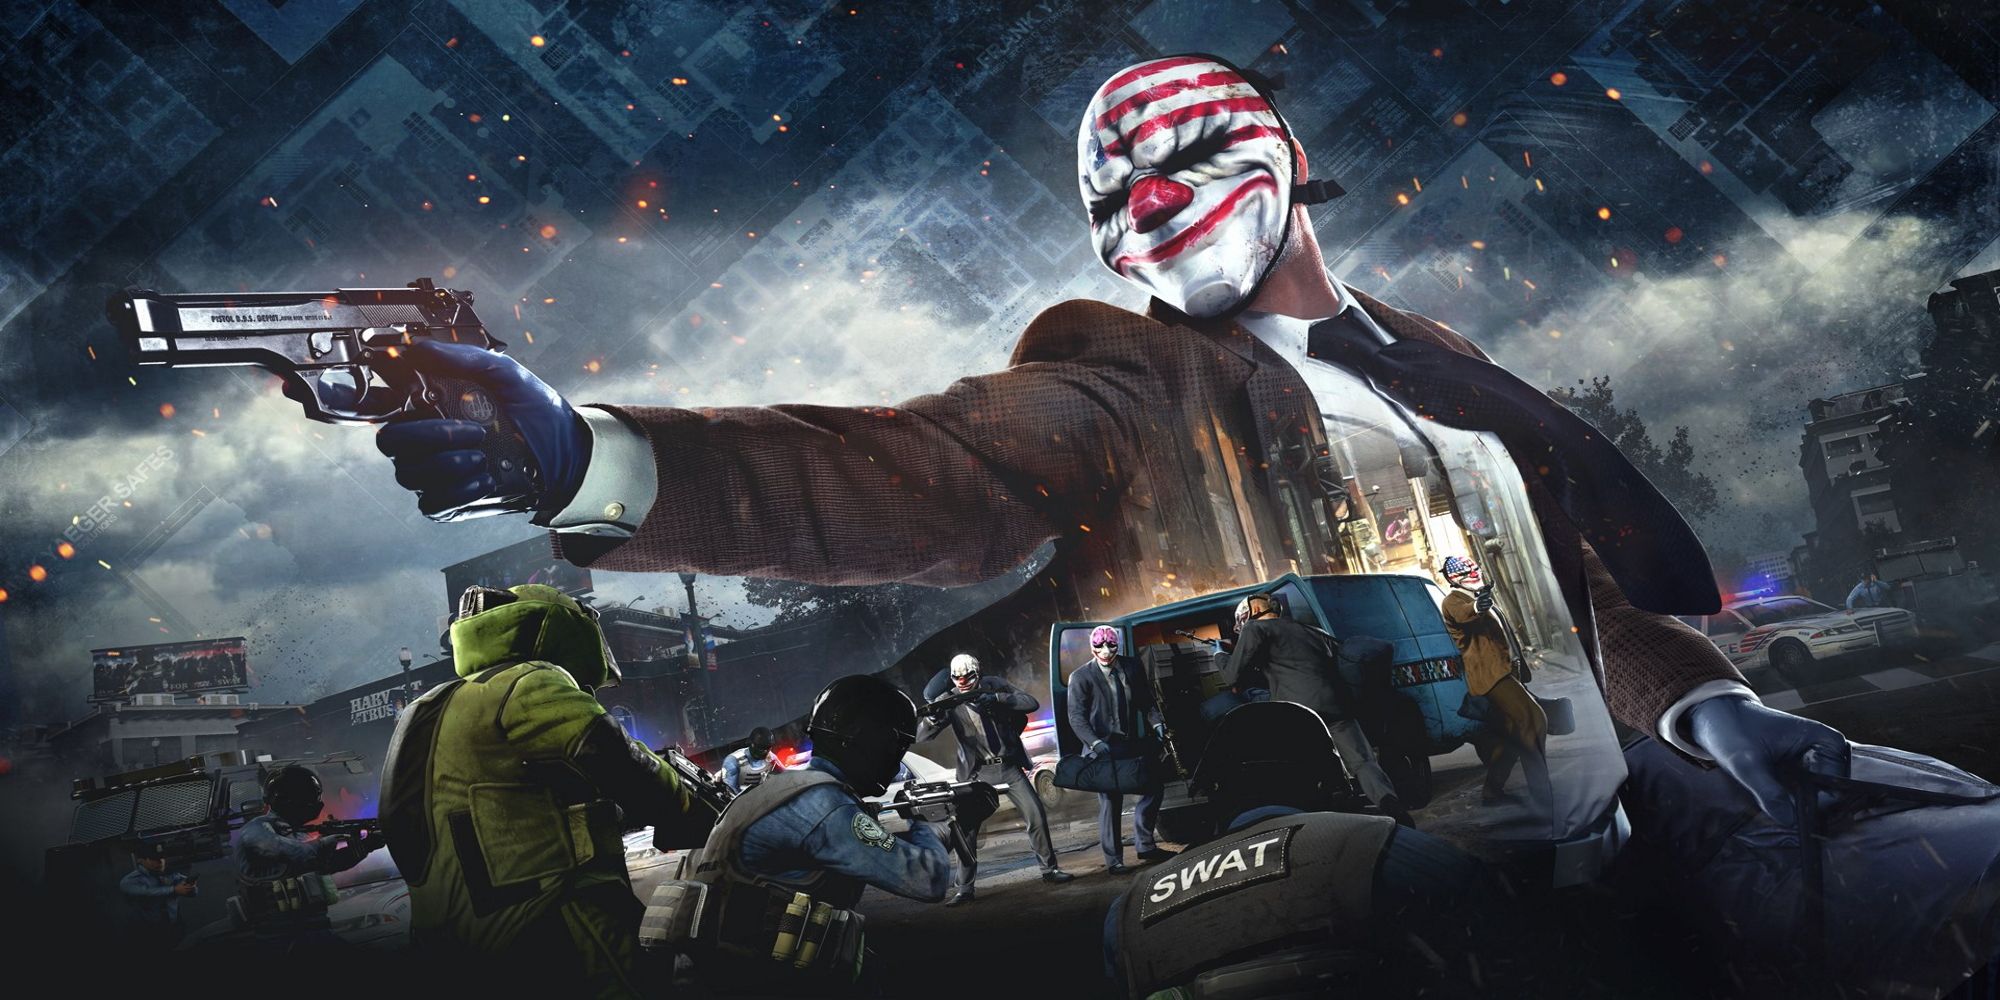 Payday 2 art, masked character standing with gun pointed, police and swat teams swarming below